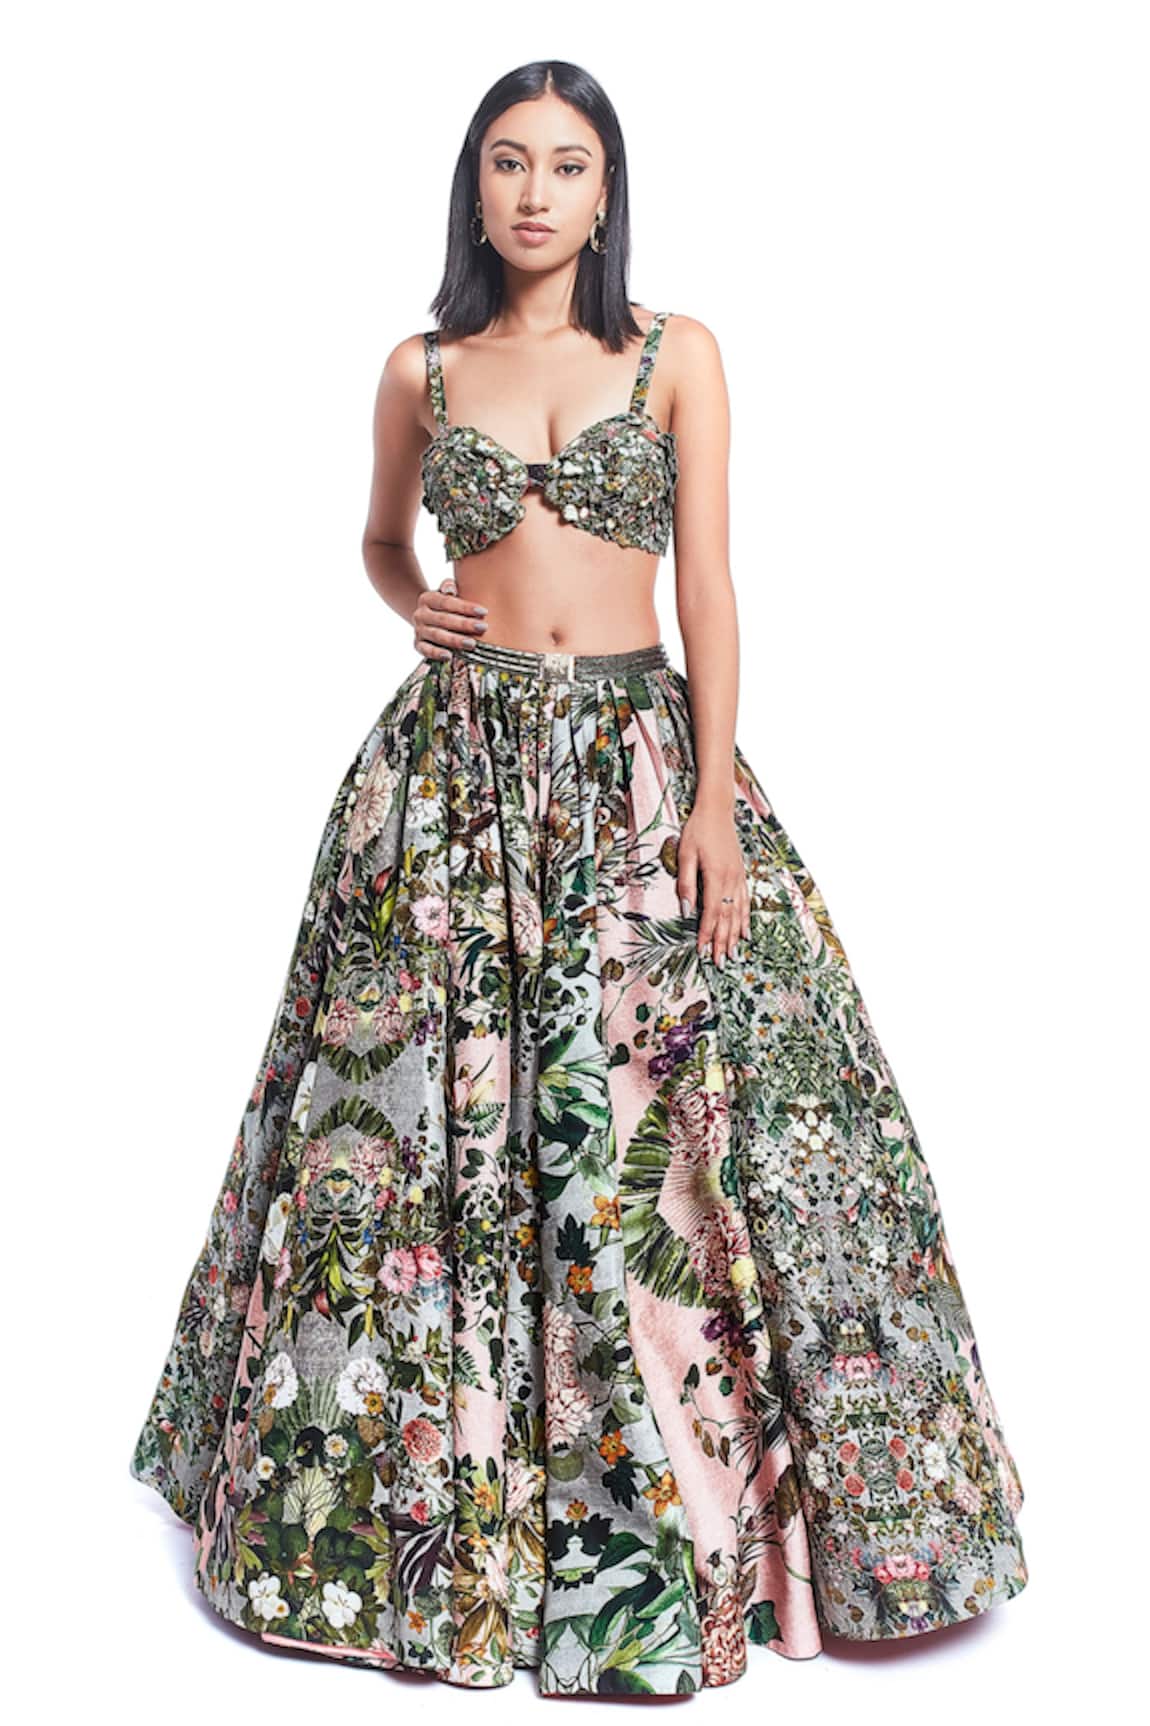 Rocky Star Embroidered Bustier & Skirt Set